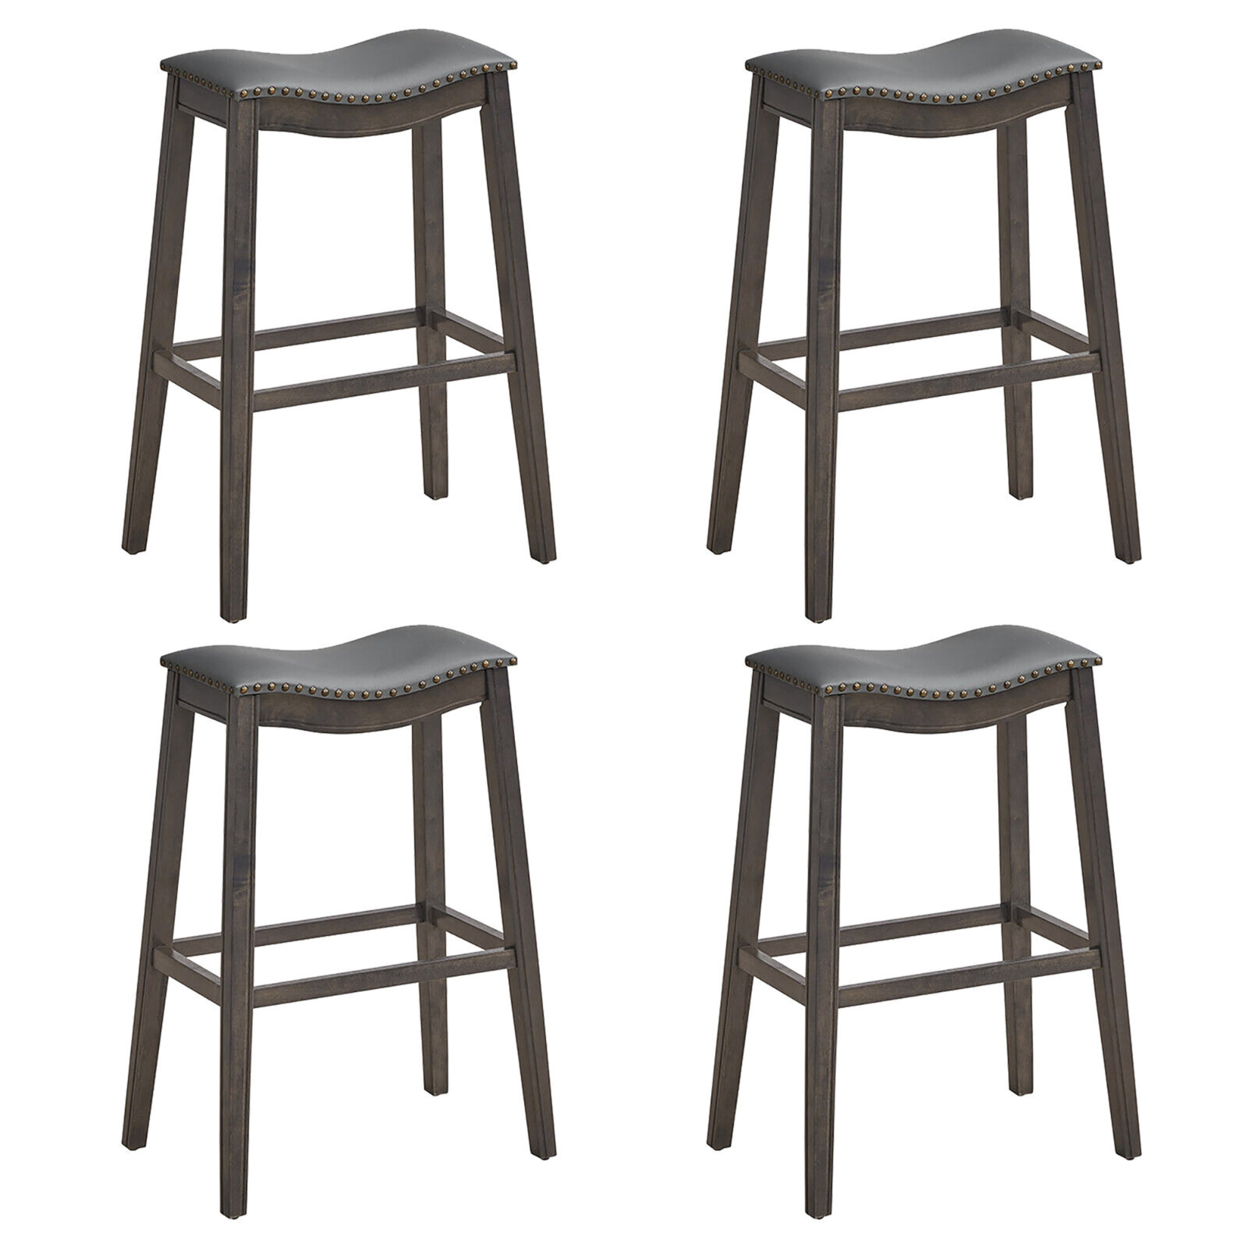 Set Of 4 Saddle Bar Stools Bar Height Kitchen Chairs W/ Rubber Wood Legs - Brown